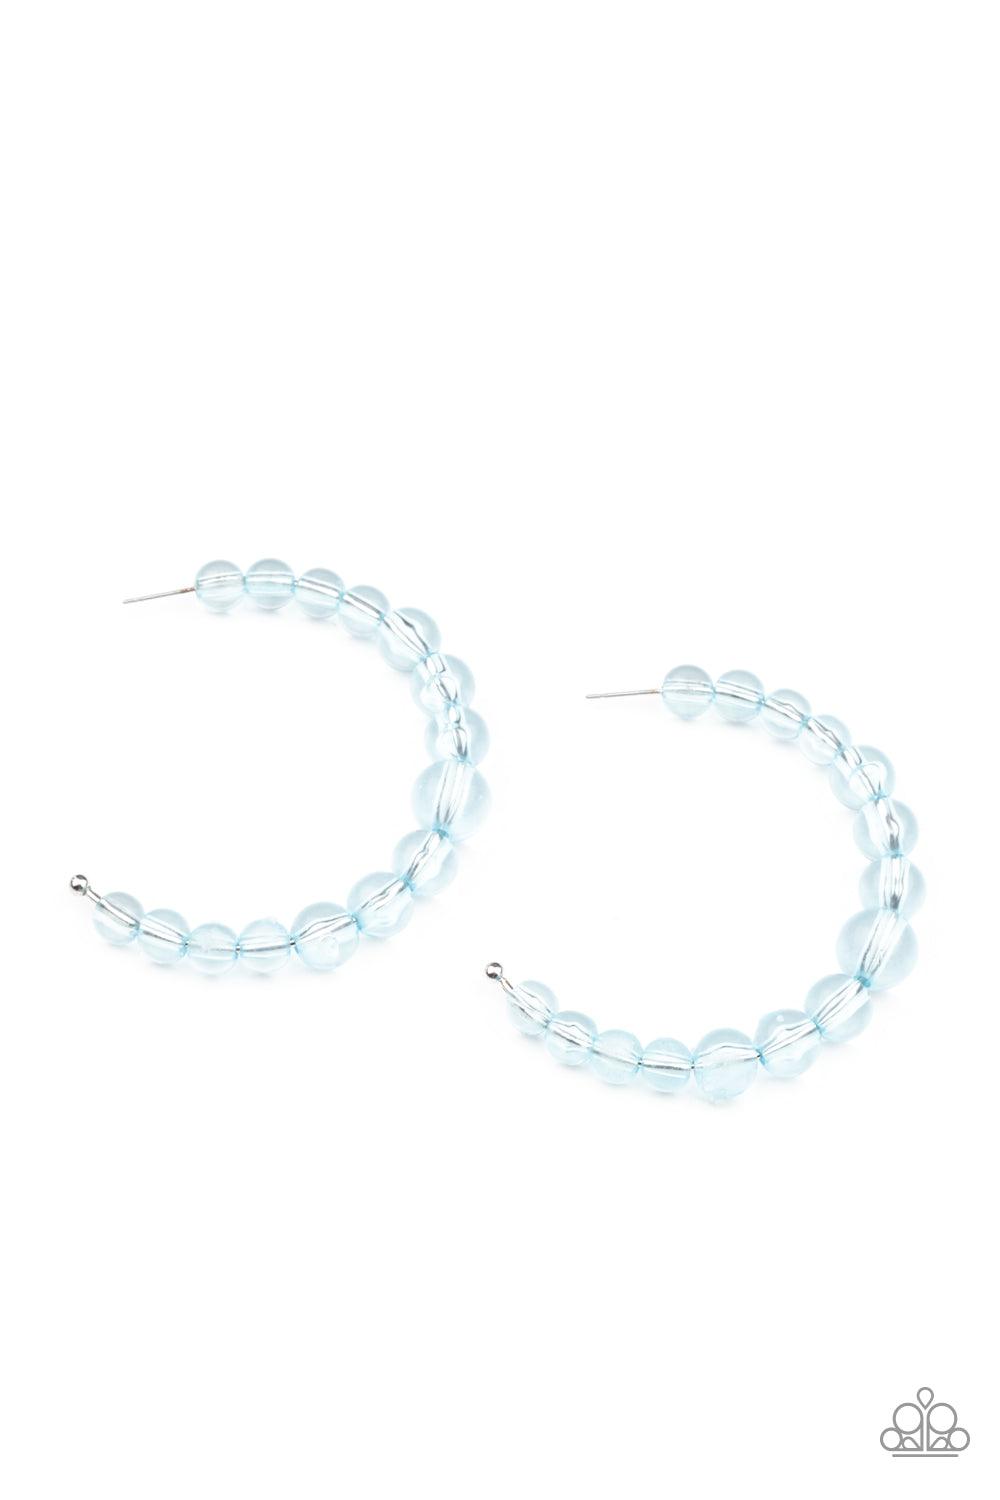 Paparazzi Accessories In The Clear - Blue Gradually increasing in size at the center, a glassy collection of Cerulean beads are threaded along an oversized hoop for a bubbly effect. Earring attaches to a standard post fitting. Hoop measures approximately